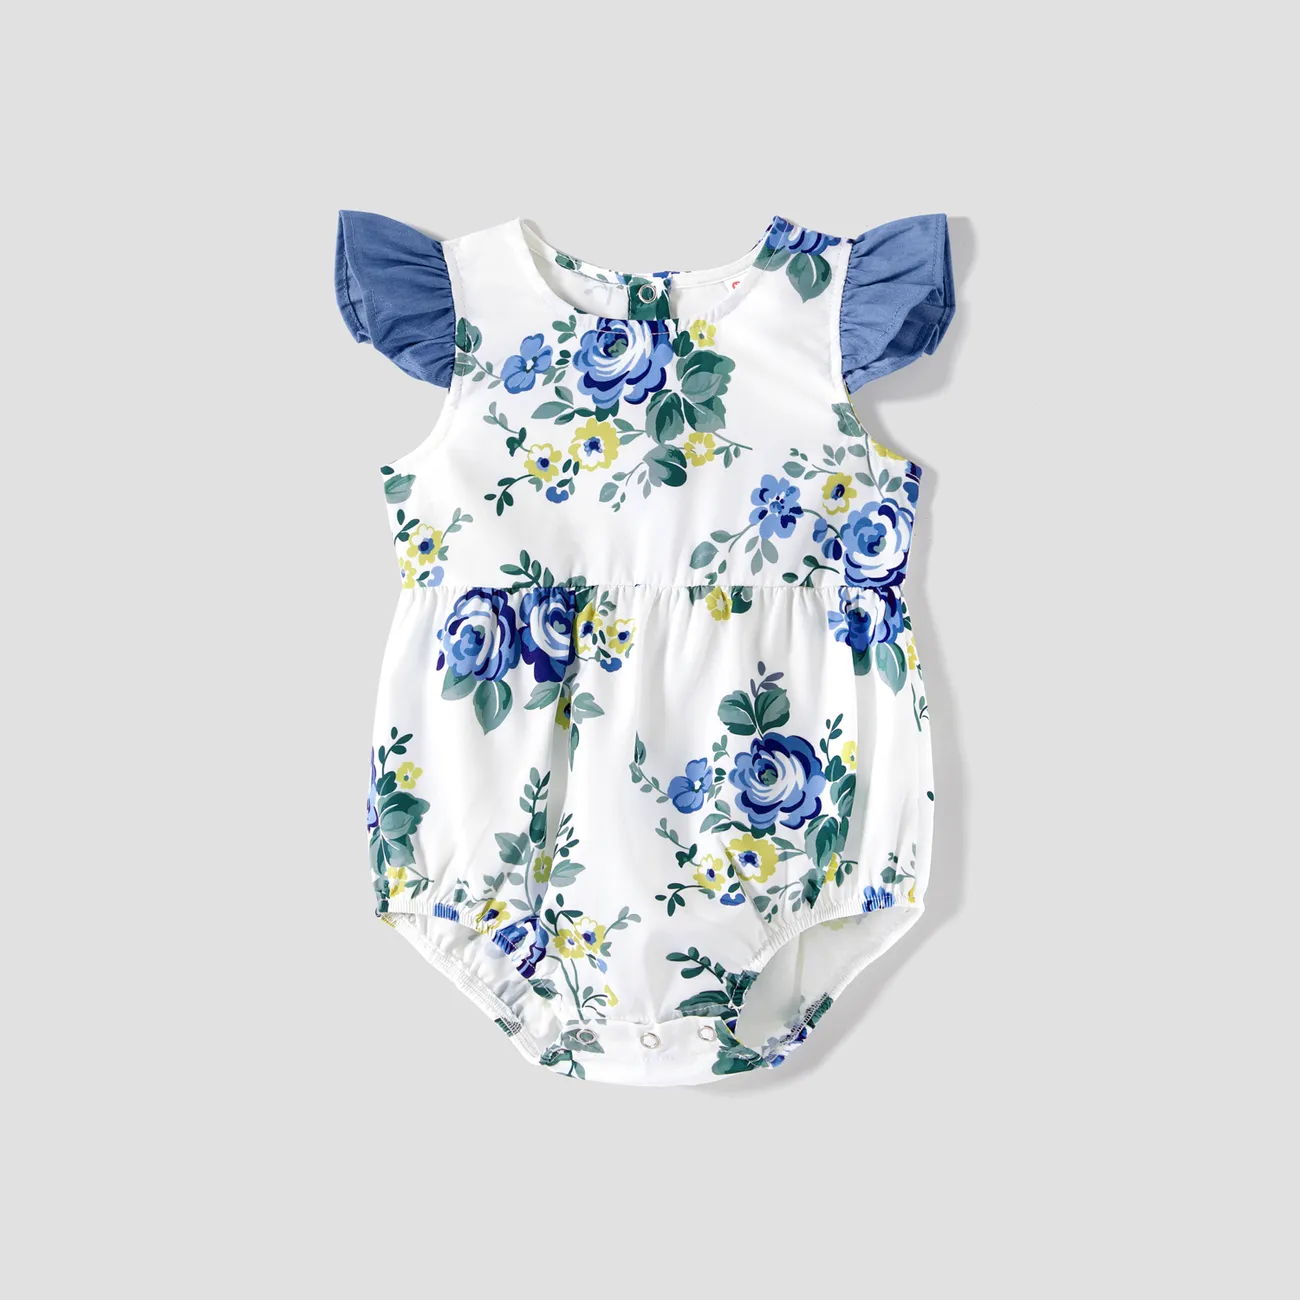 Family Matching 100% Cotton Blue Short-sleeve Shirts and Floral Print Ruffle Trim Spliced Cami Dresses Sets Blue big image 1